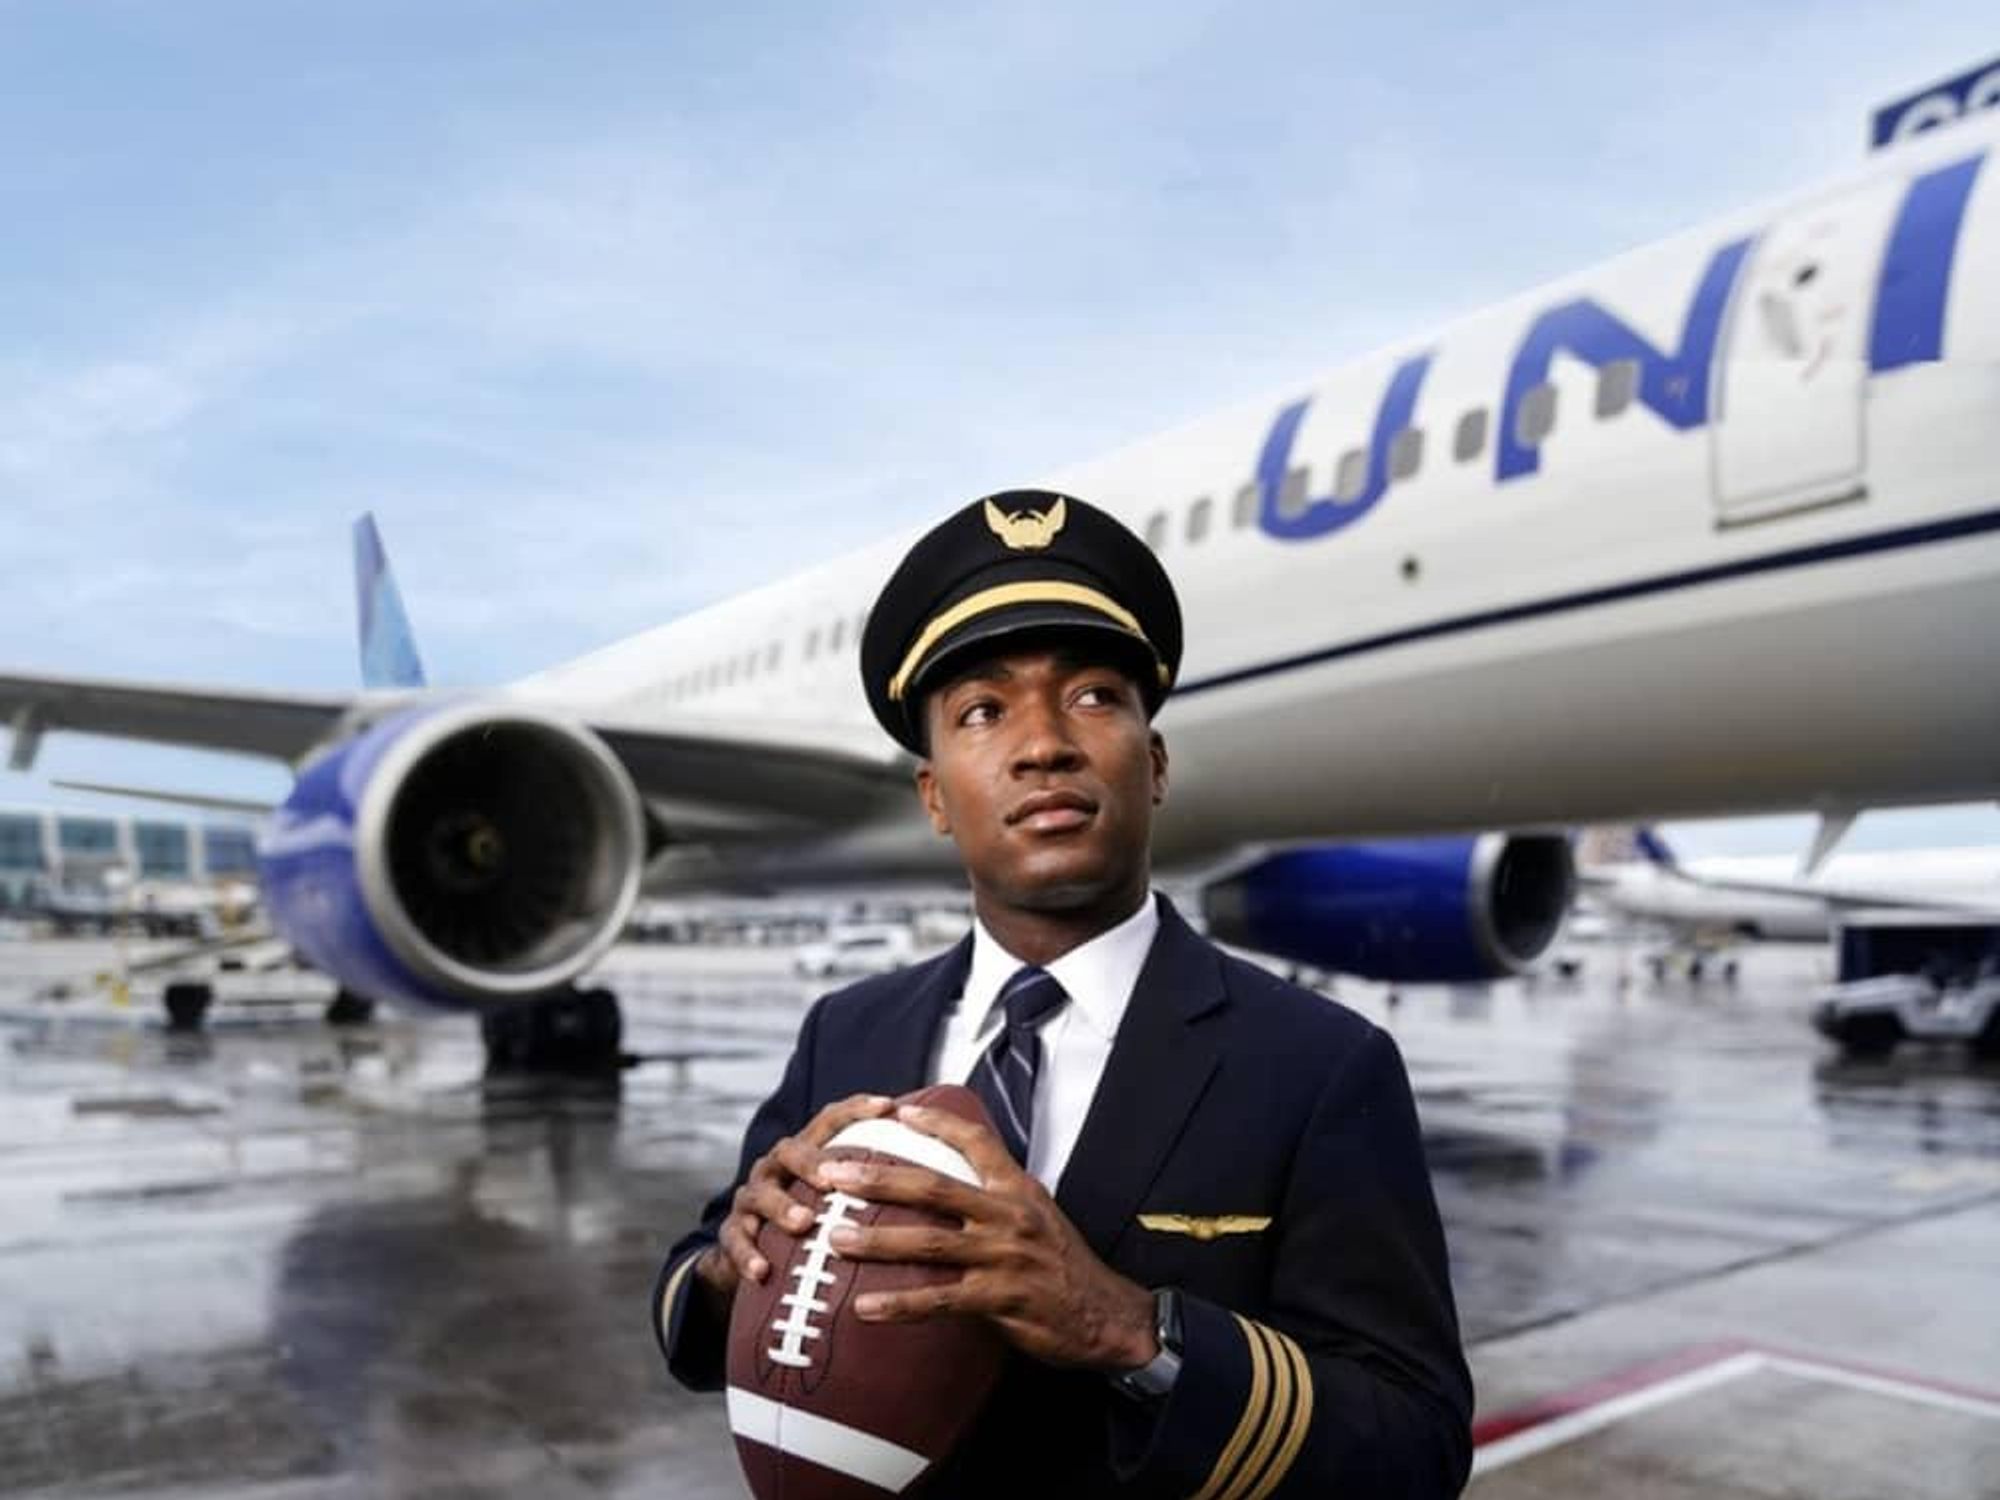 United Airlines pilot football